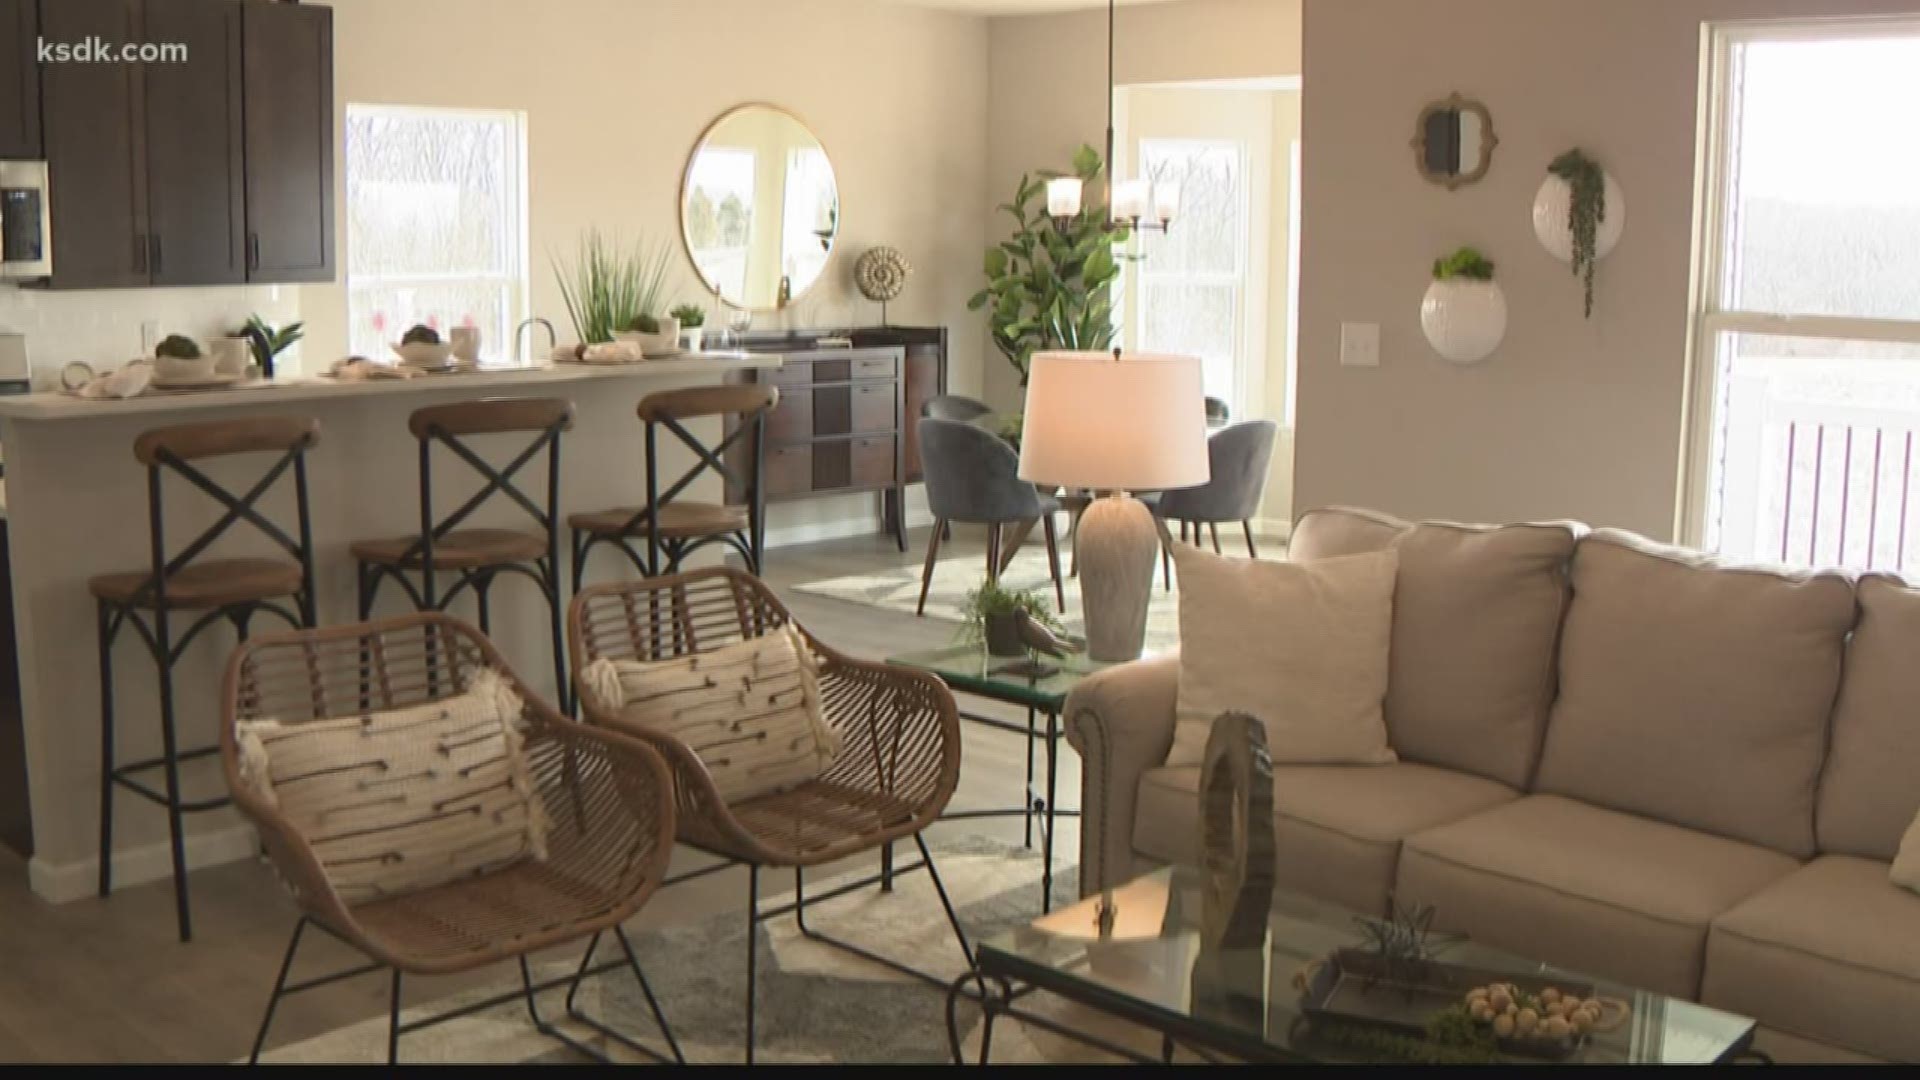 This week take a look at a pastoral McBride Homes Community called Westhaven.